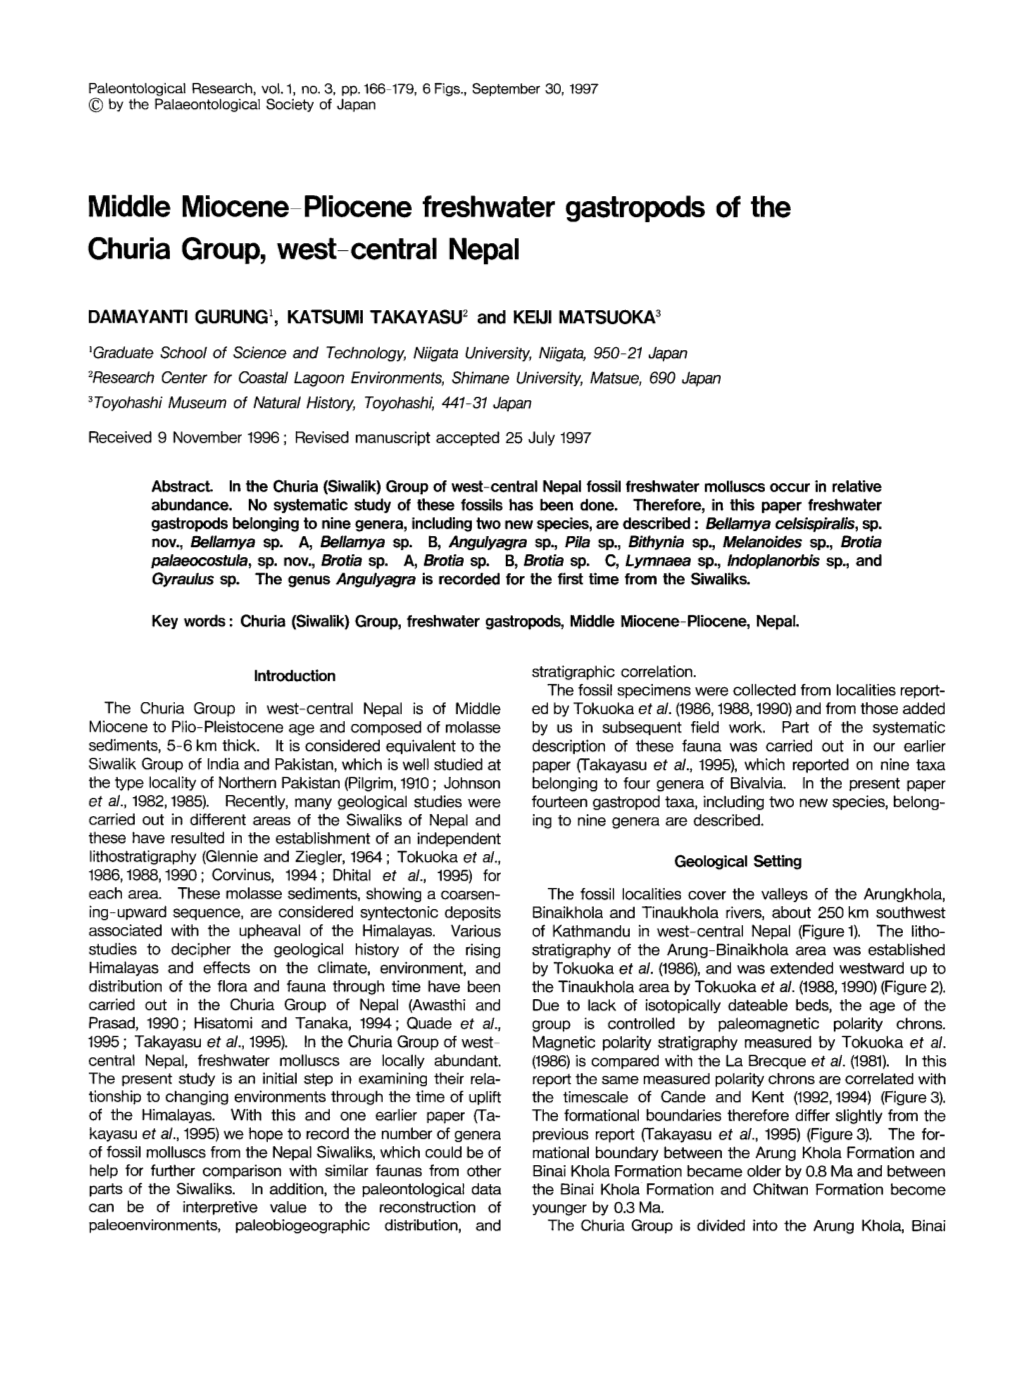 Middle Miocene-Pliocene Freshwater Gastropods of the Churia Group, West-Central Nepal